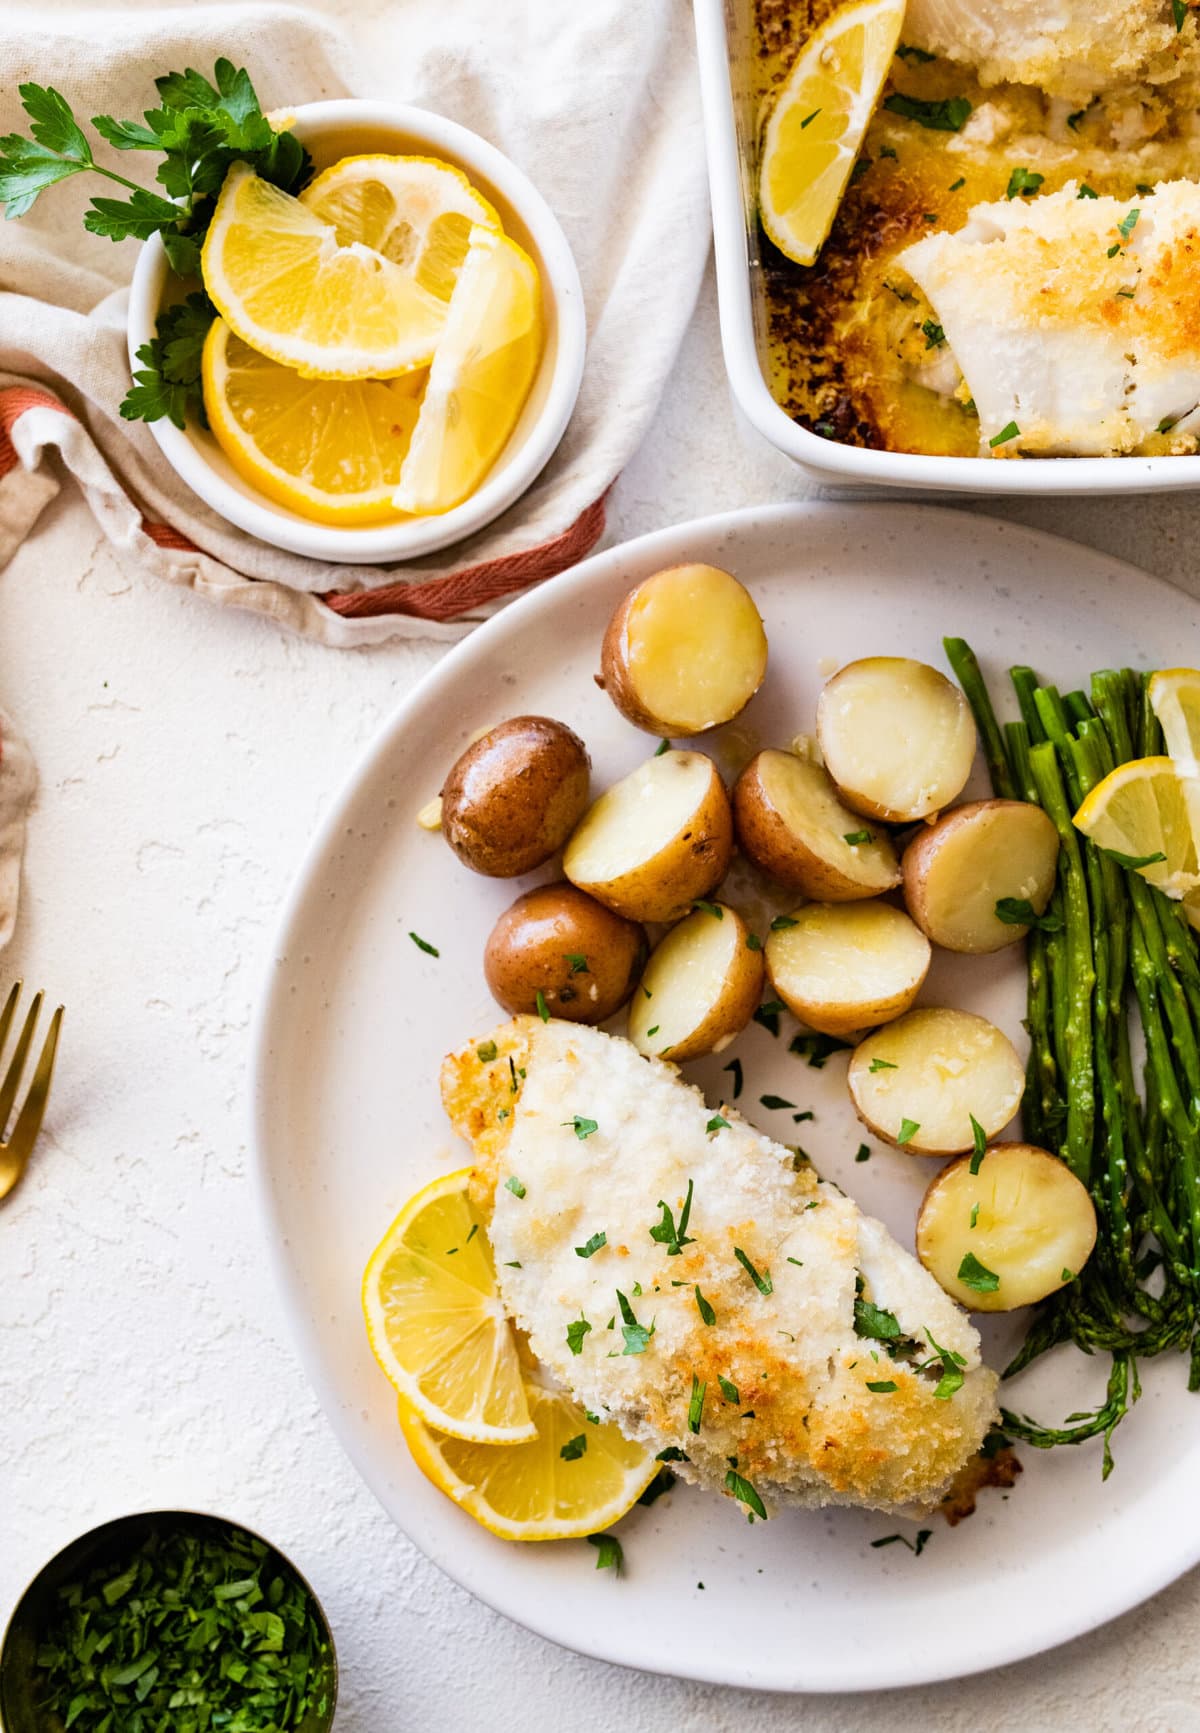 baked stuffed flounder on a plate with lemon wedges. potatoes and asparagus on a plate.